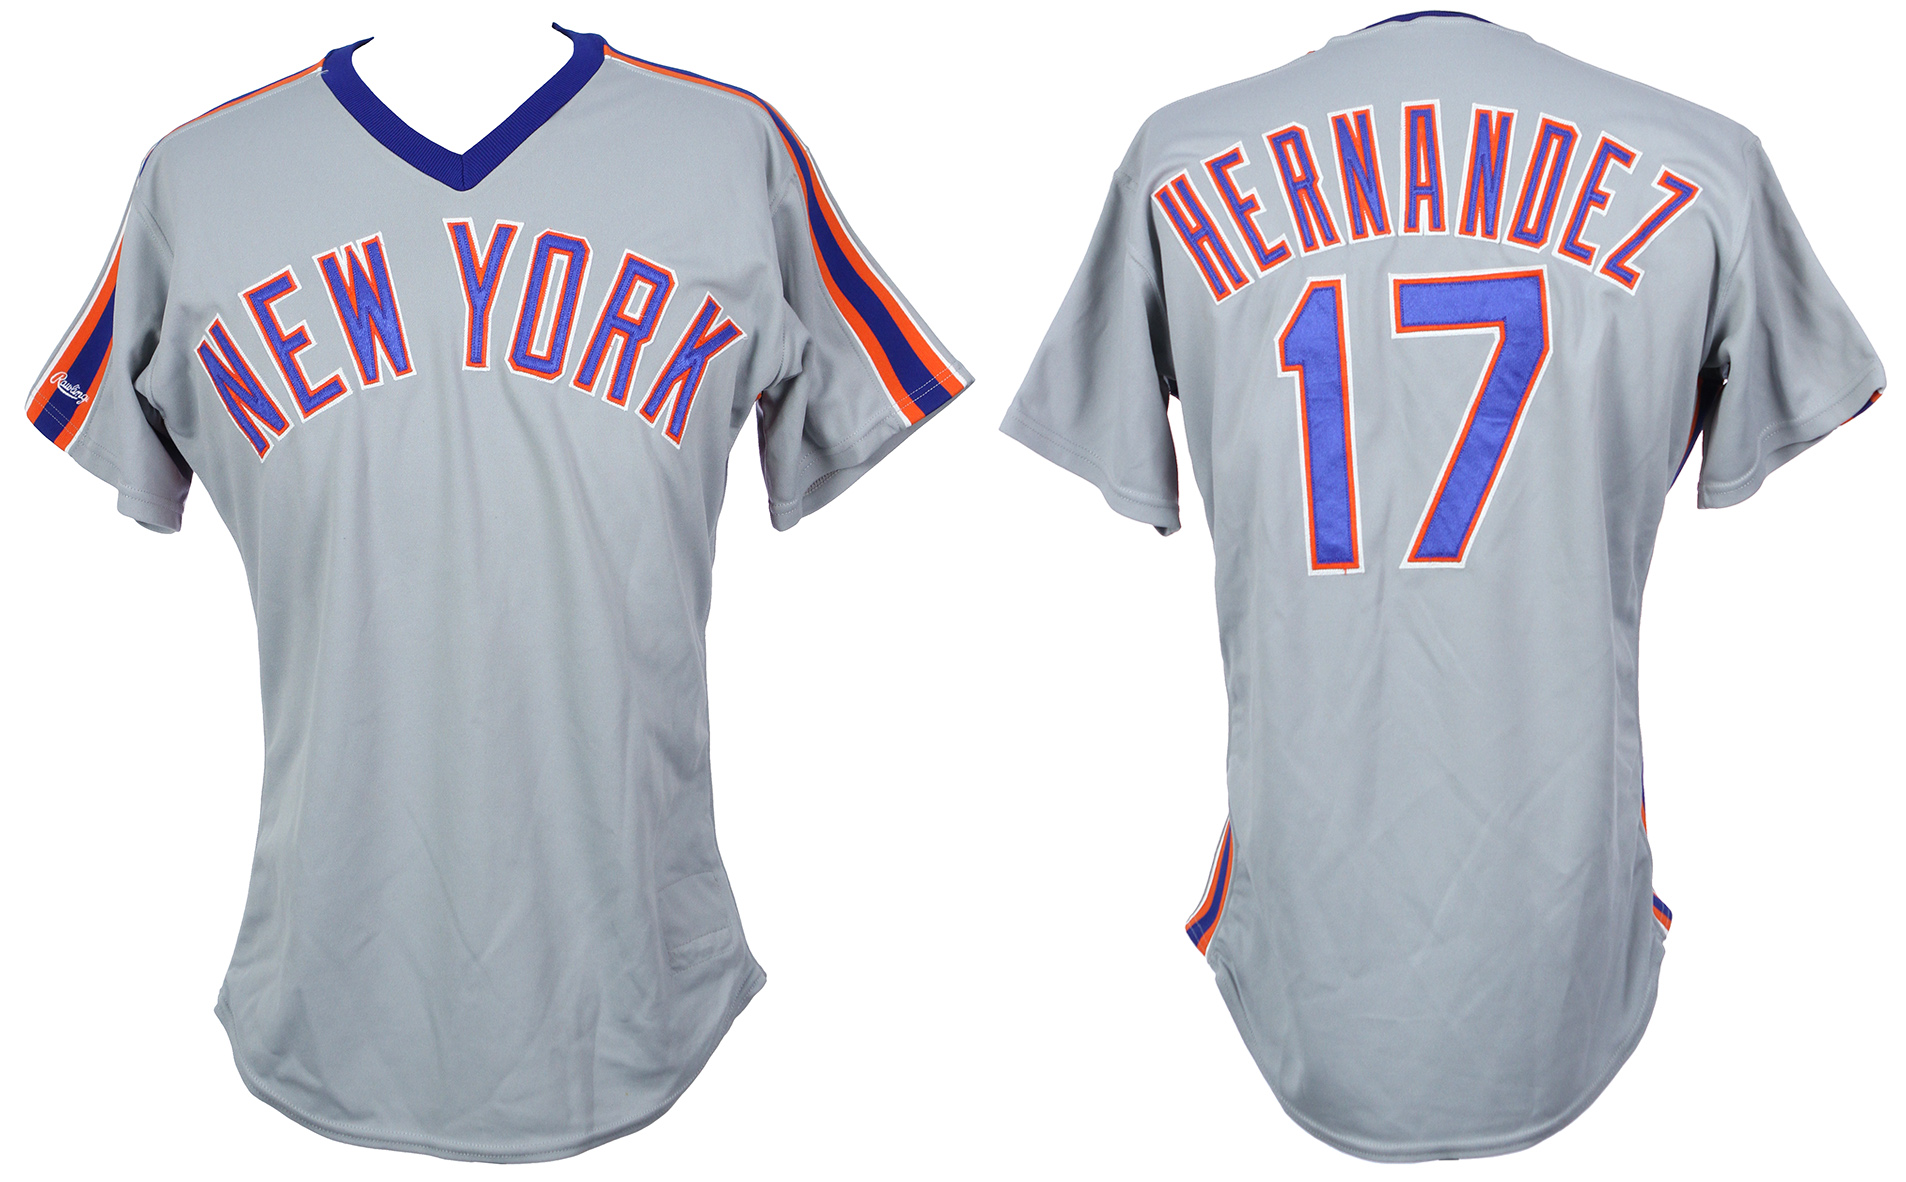  Game Used: Jeff Innis 1993 Mets Jersey